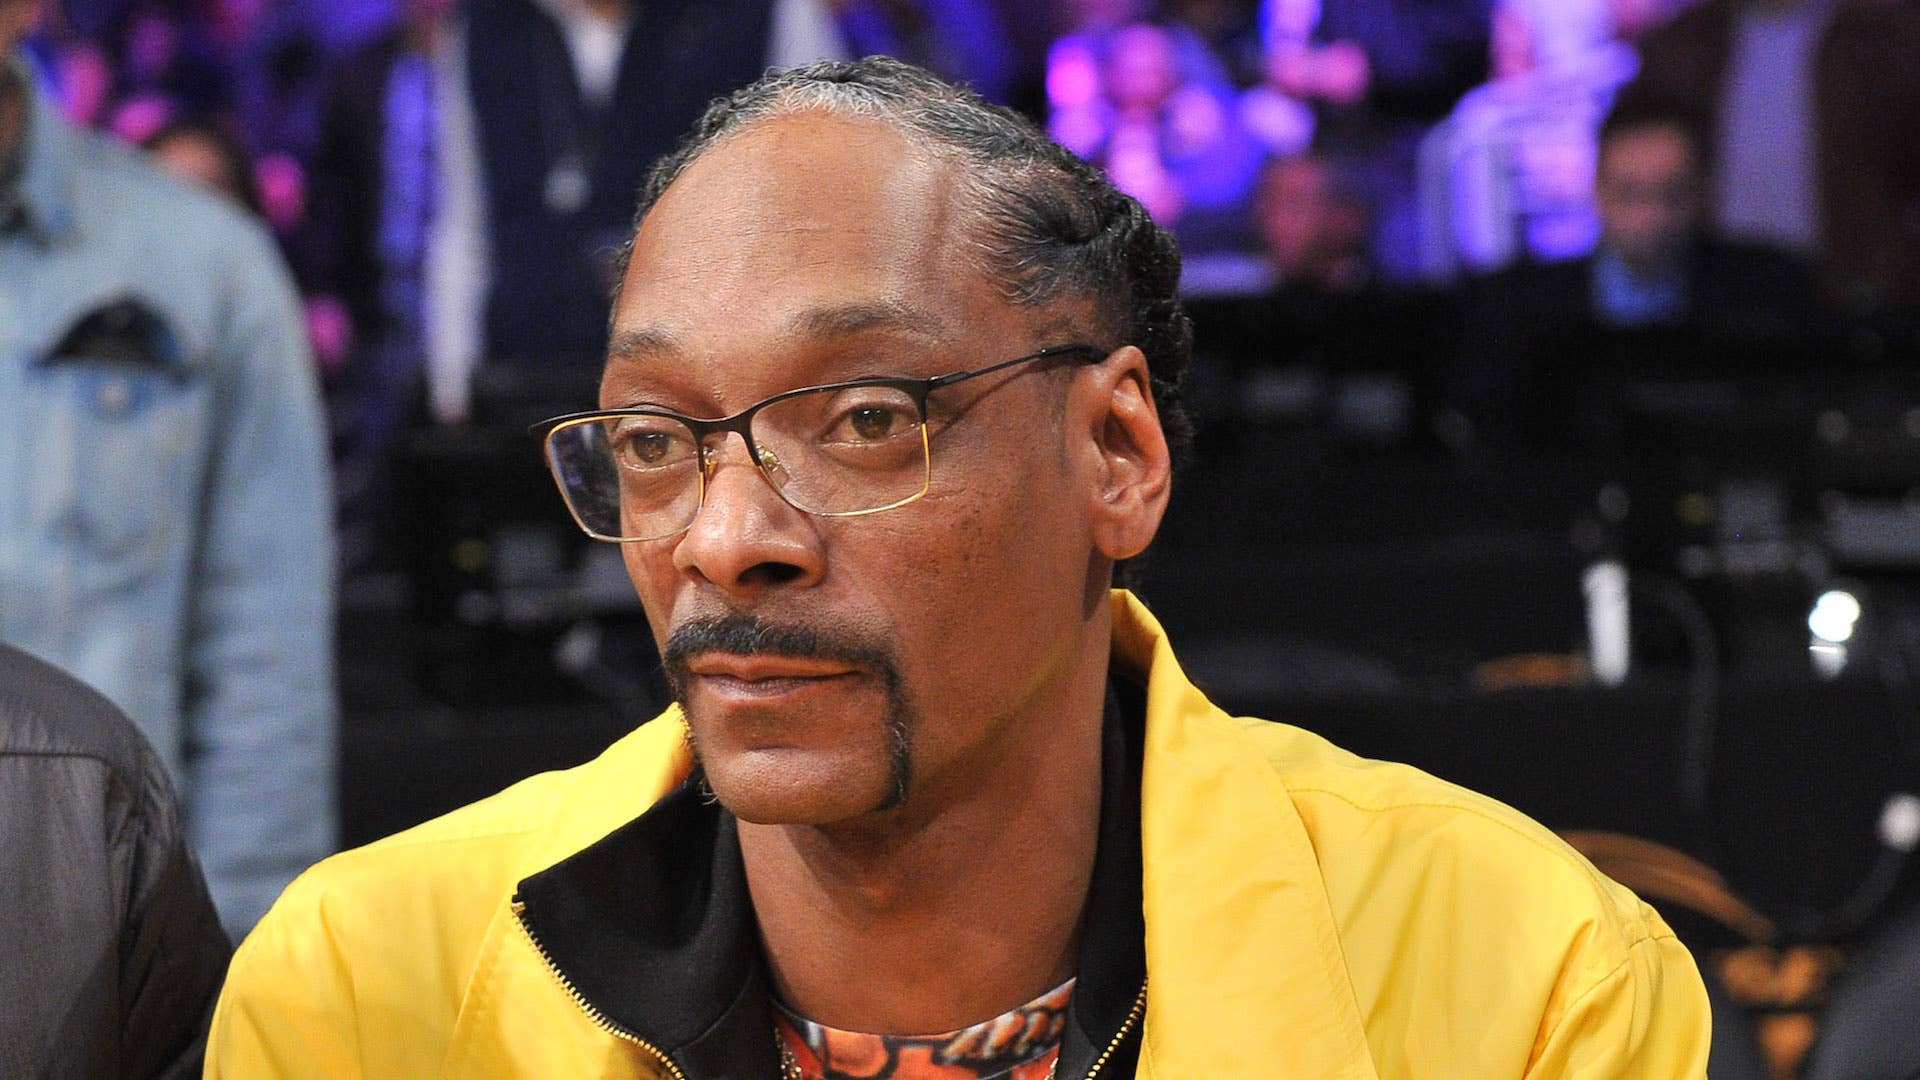 Snoop Dogg attends a basketball game